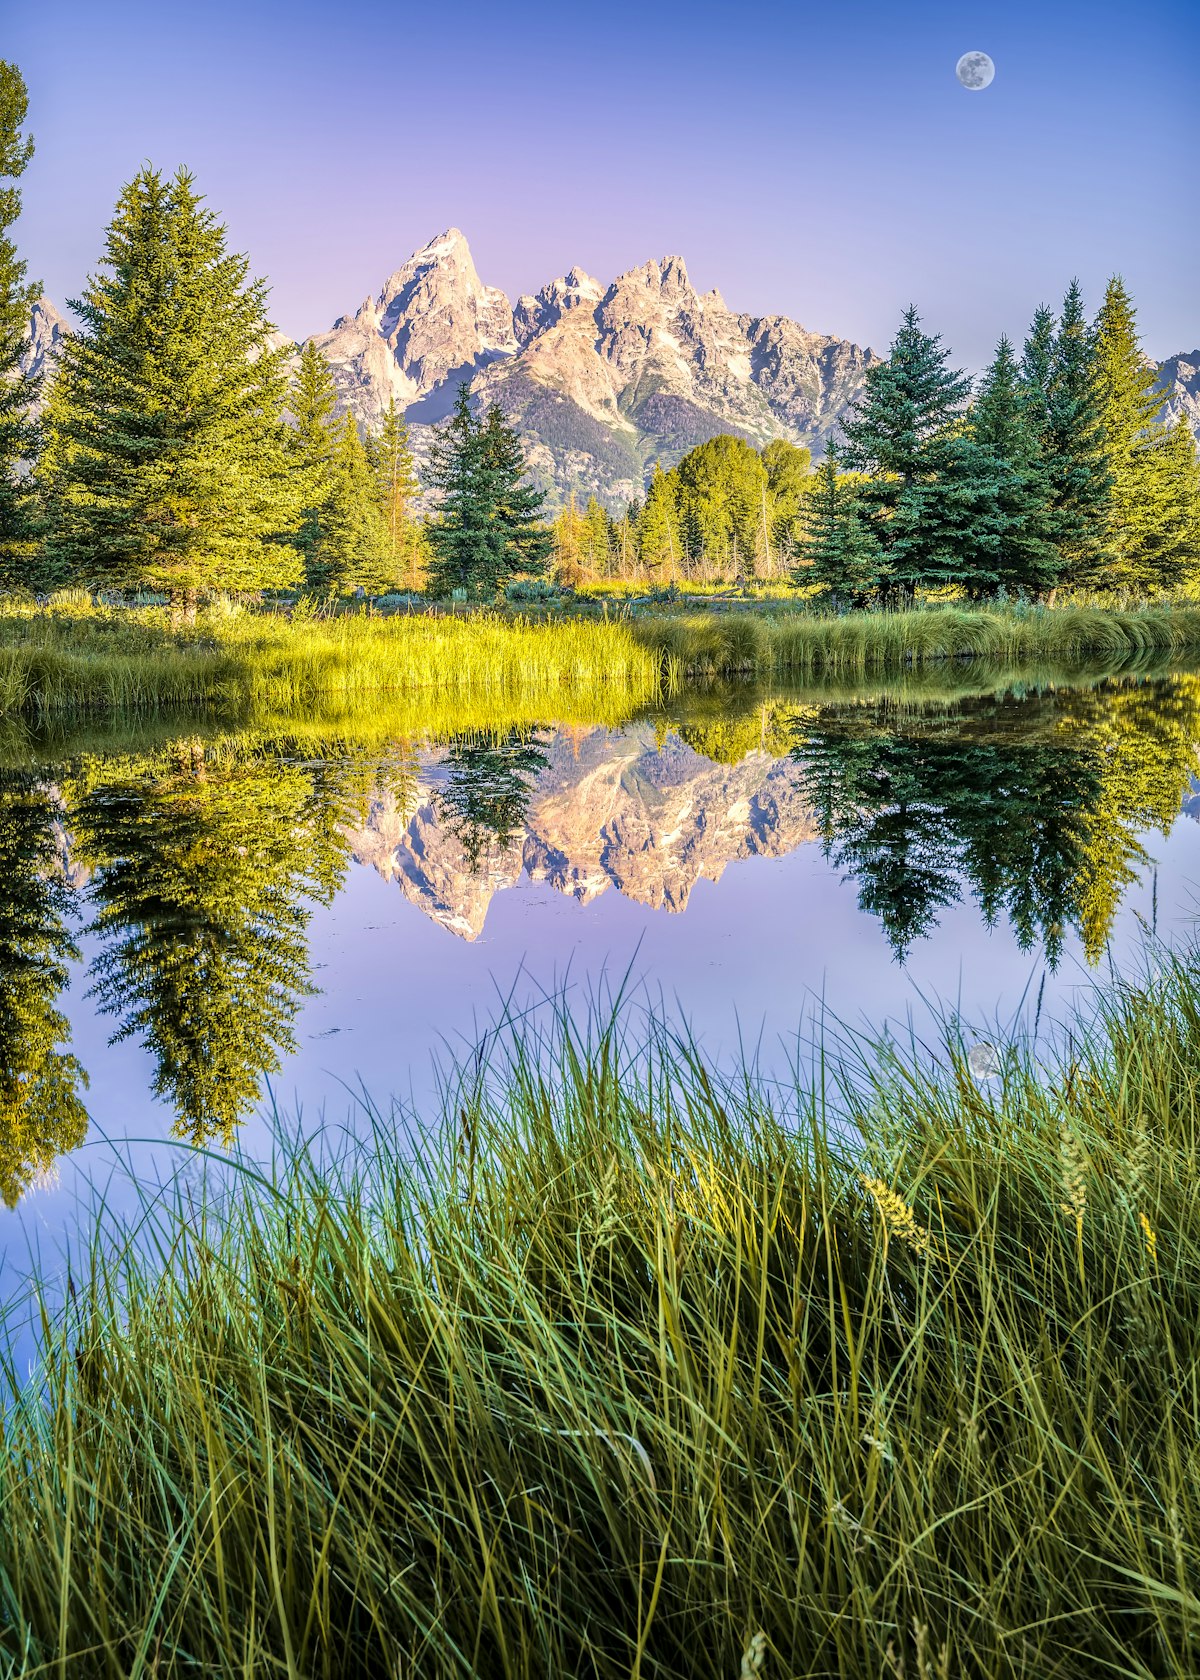 The Teton range's reflection upon the Snake River after dawn at Schwabacher Landing in Grand Teton National Park, WY.